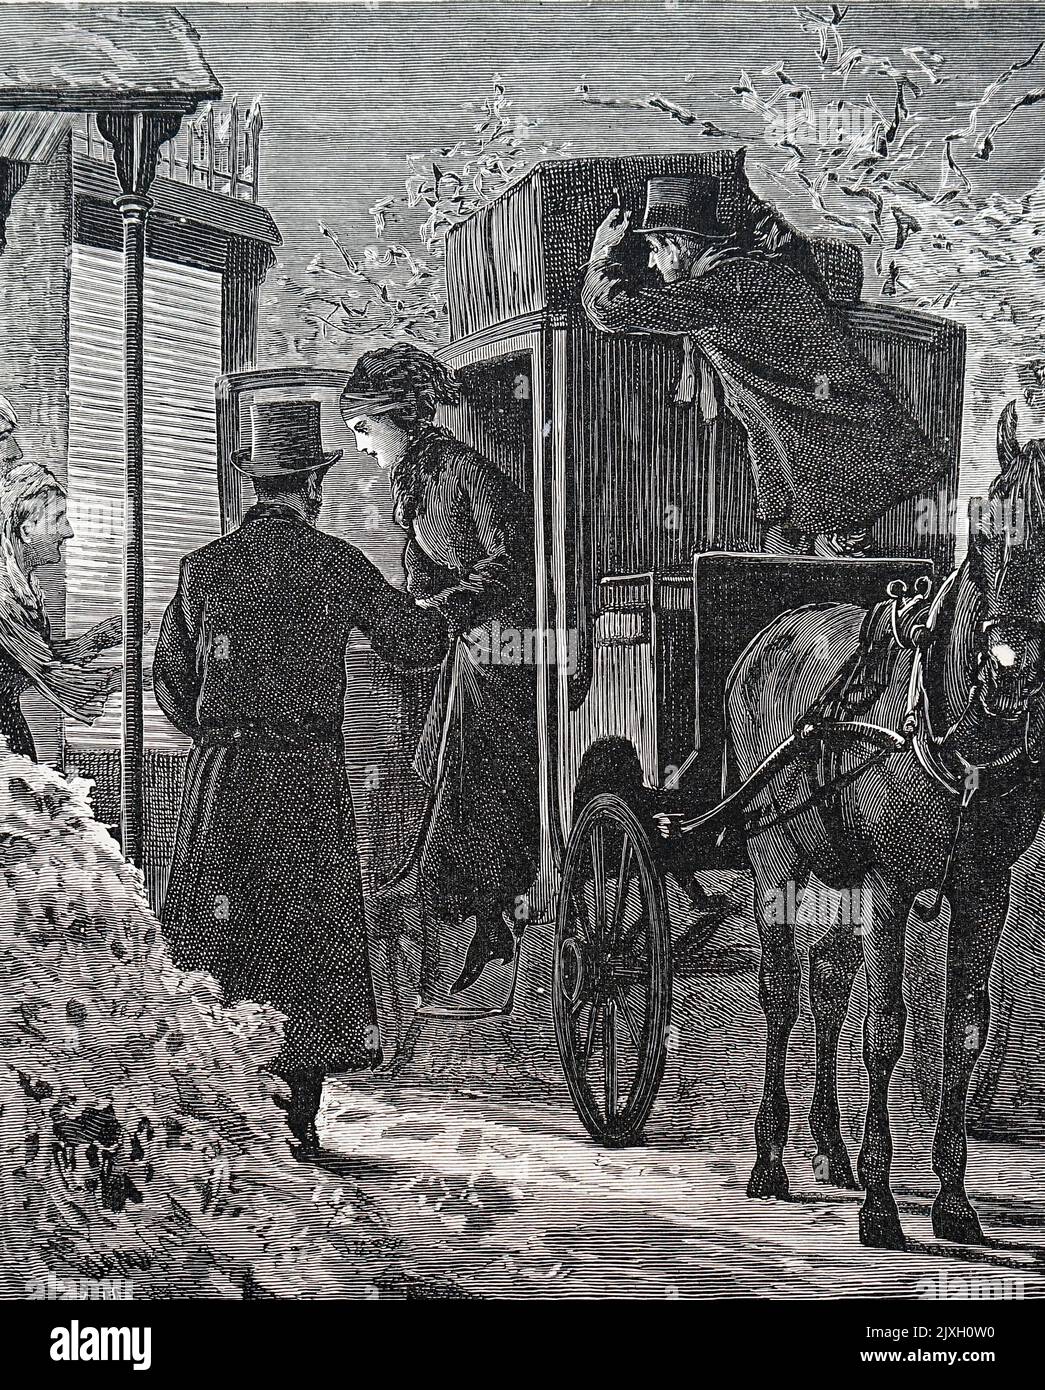 Illustration depicting a woman emerging from a carriage as she visits home for Christmas. Dated 19th Century Stock Photo